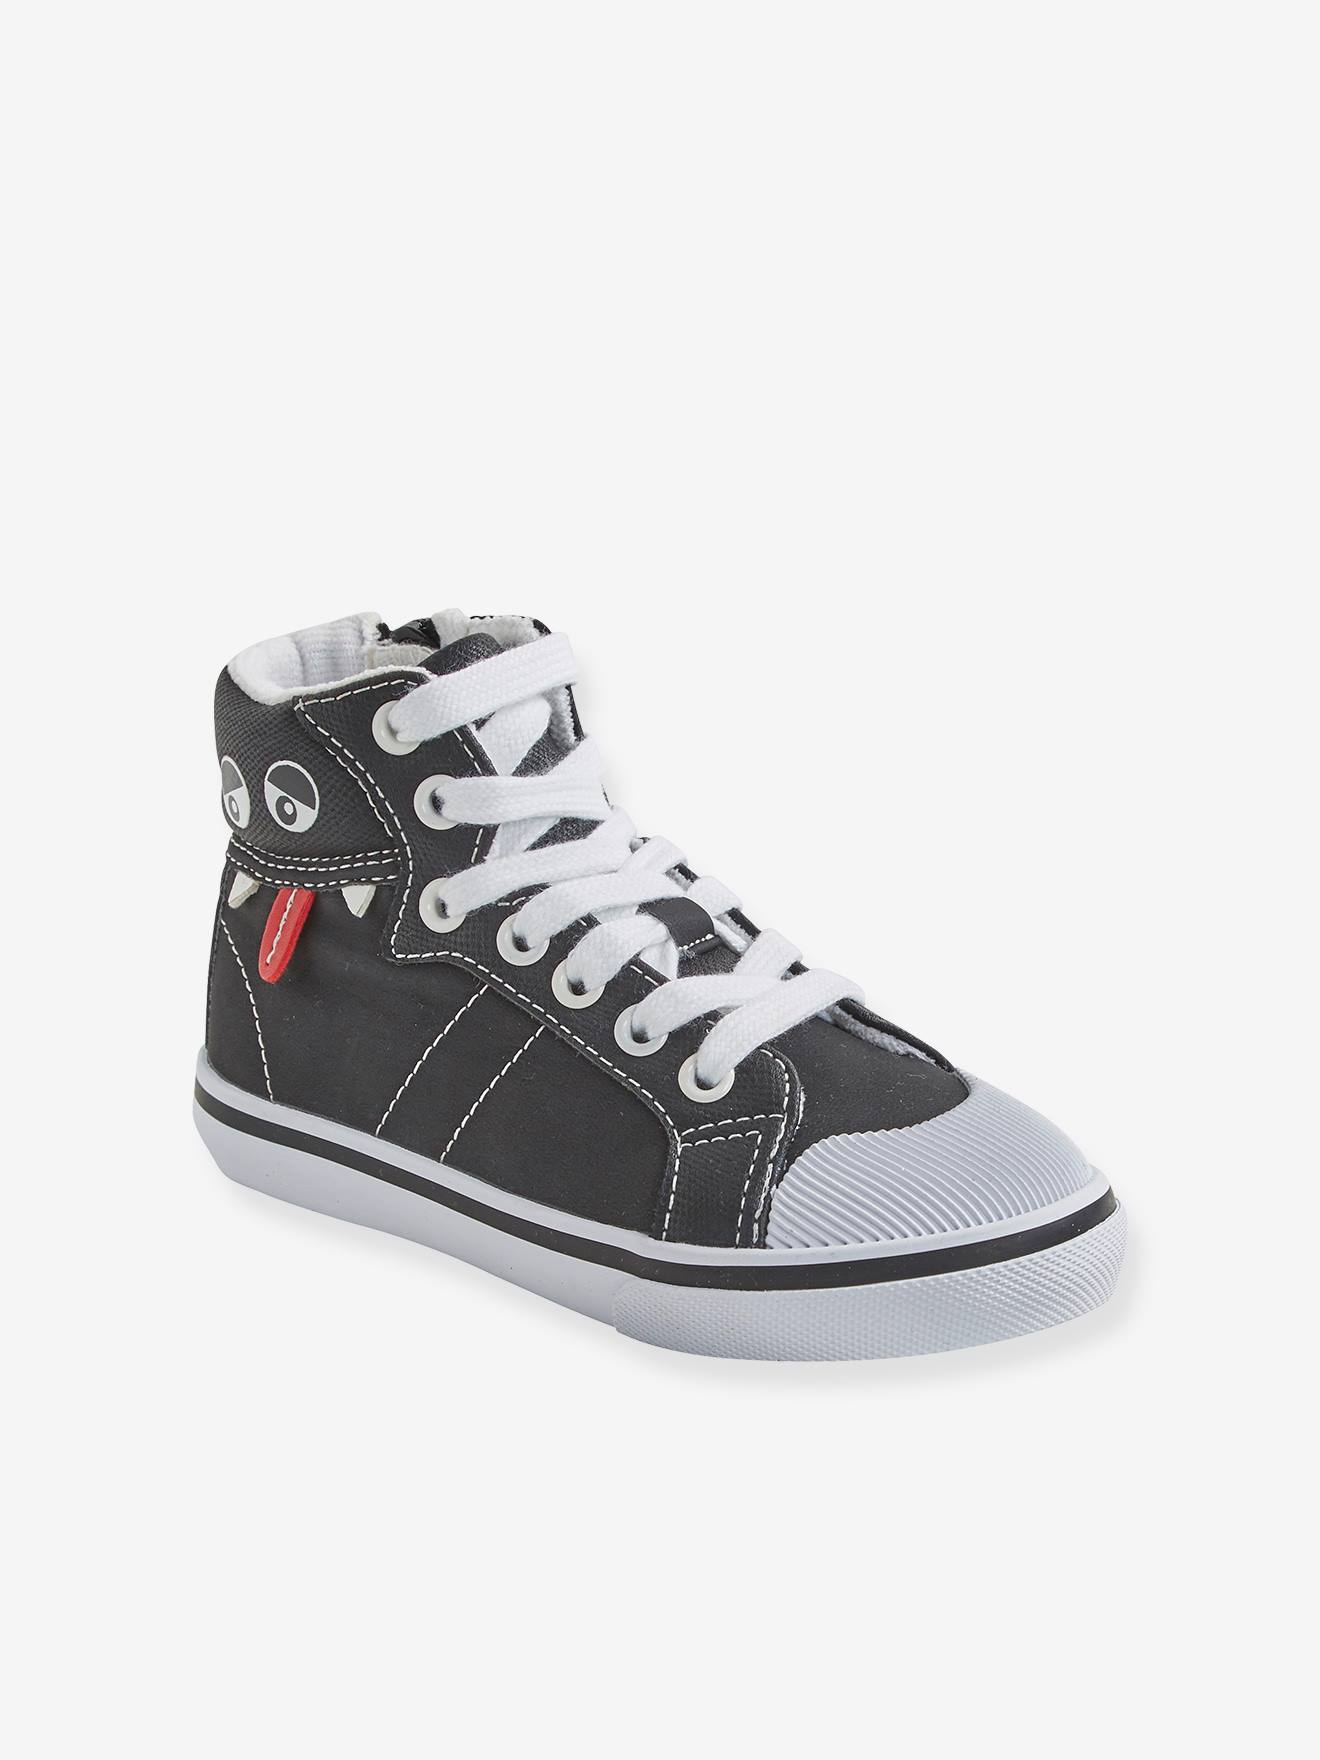 High Top Trainers for Boys, Designed 